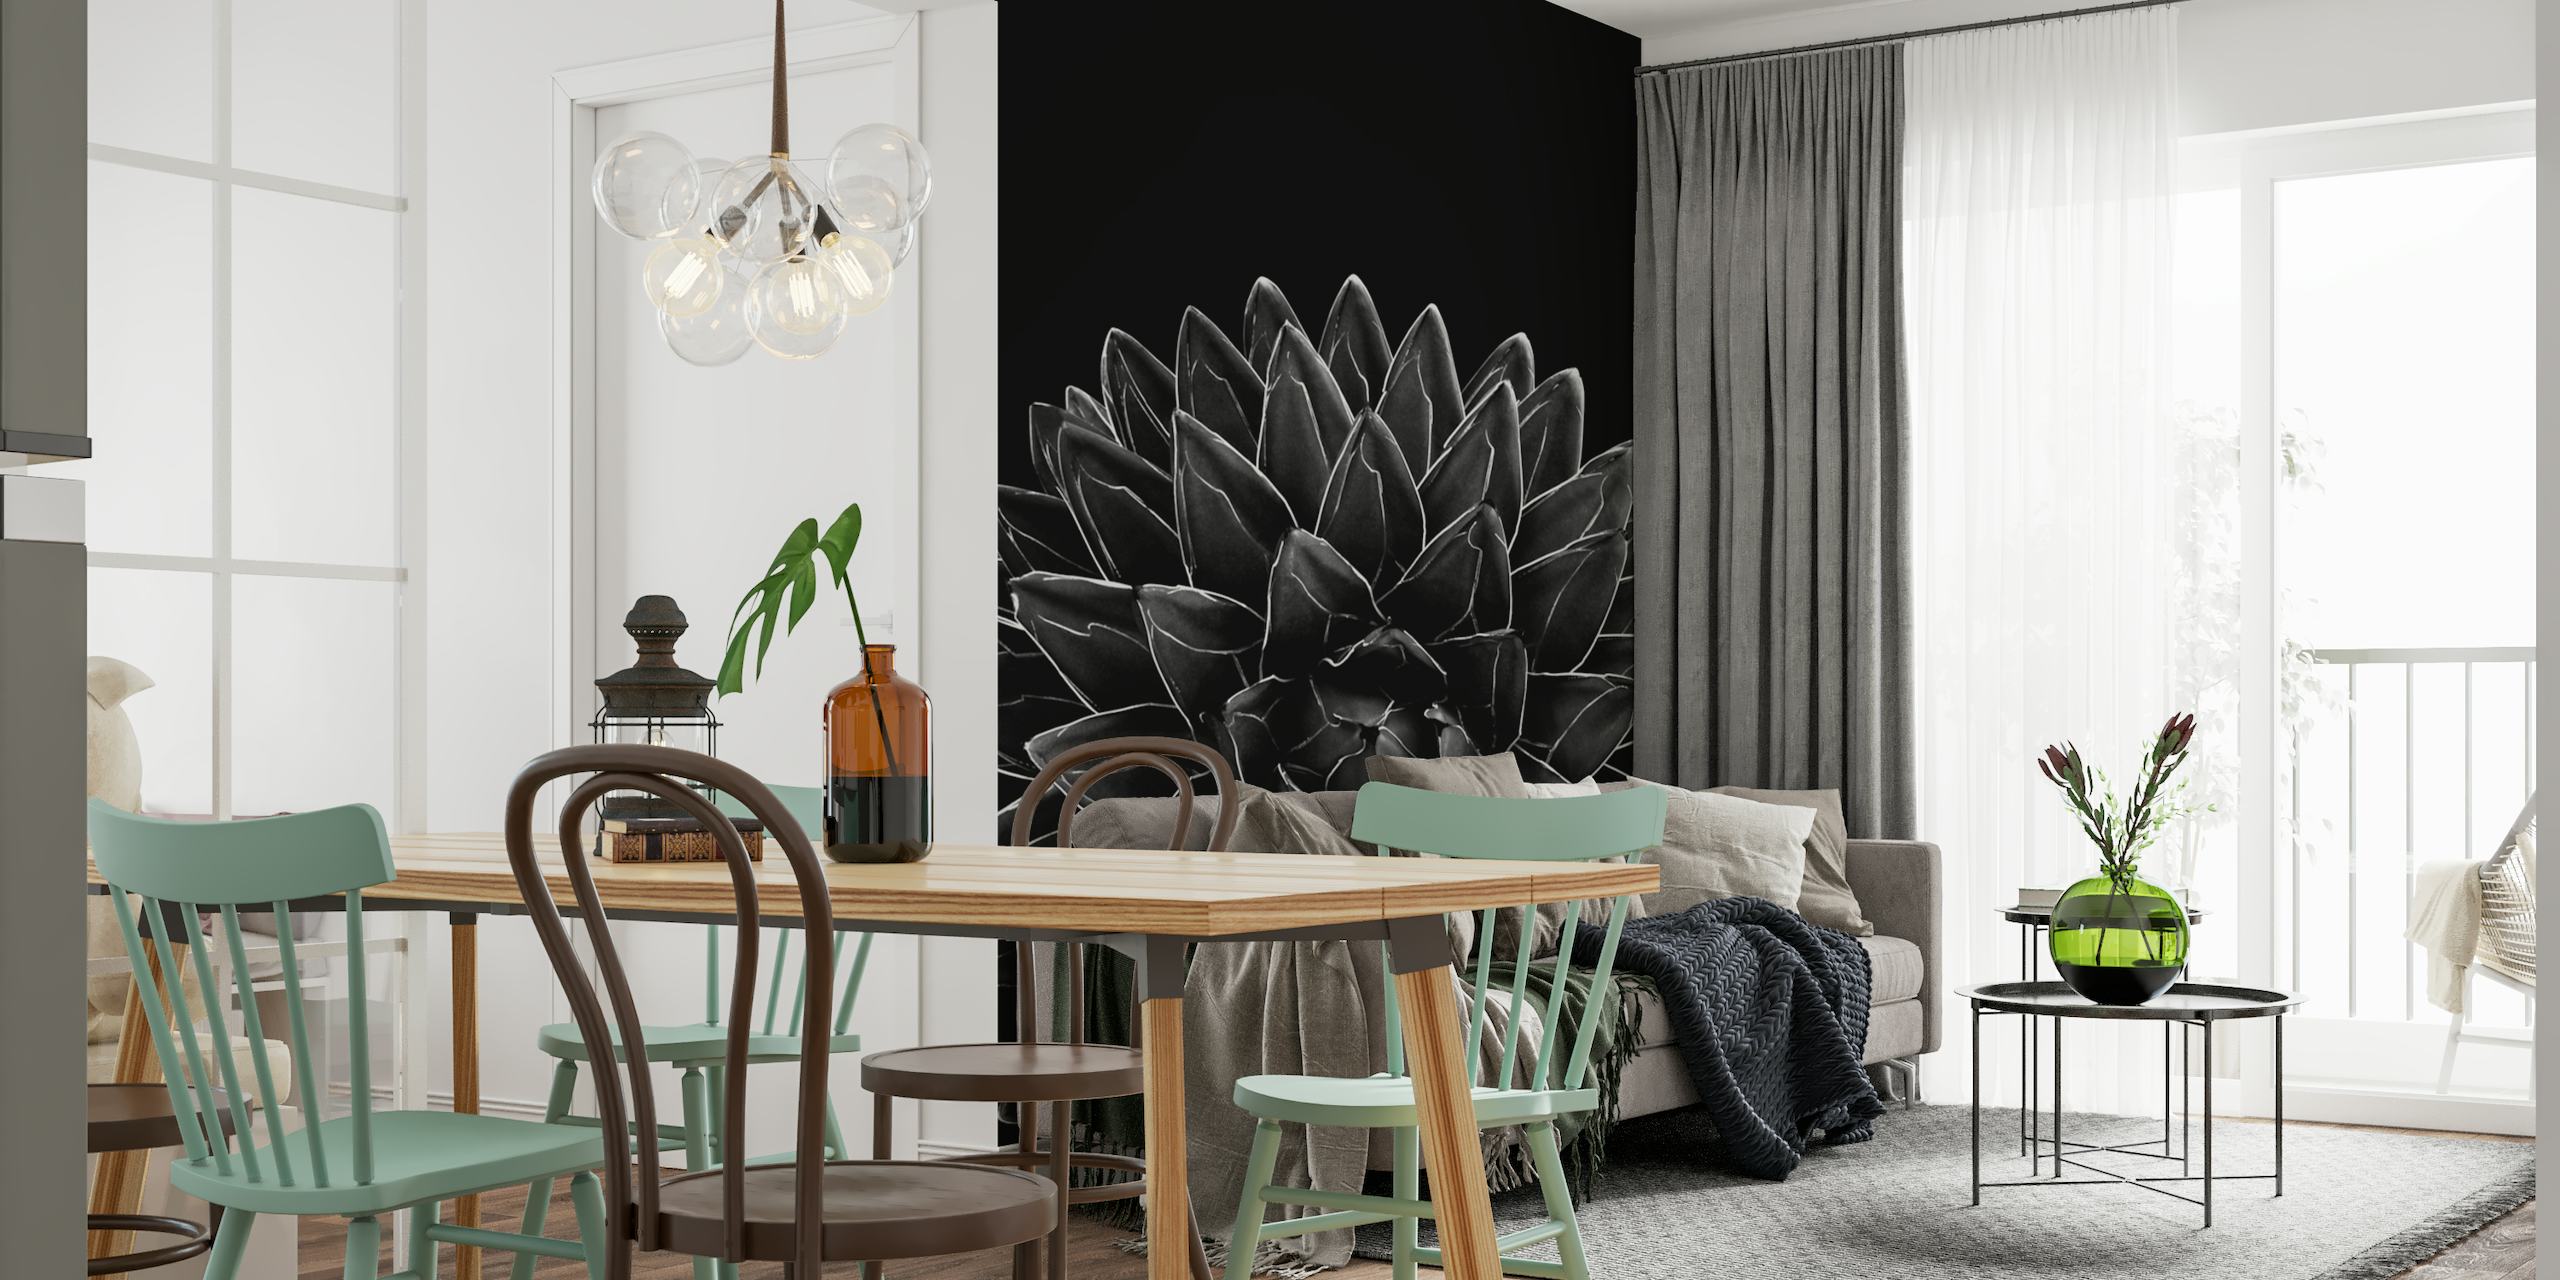 Black Agave Chic 1 wallpaper